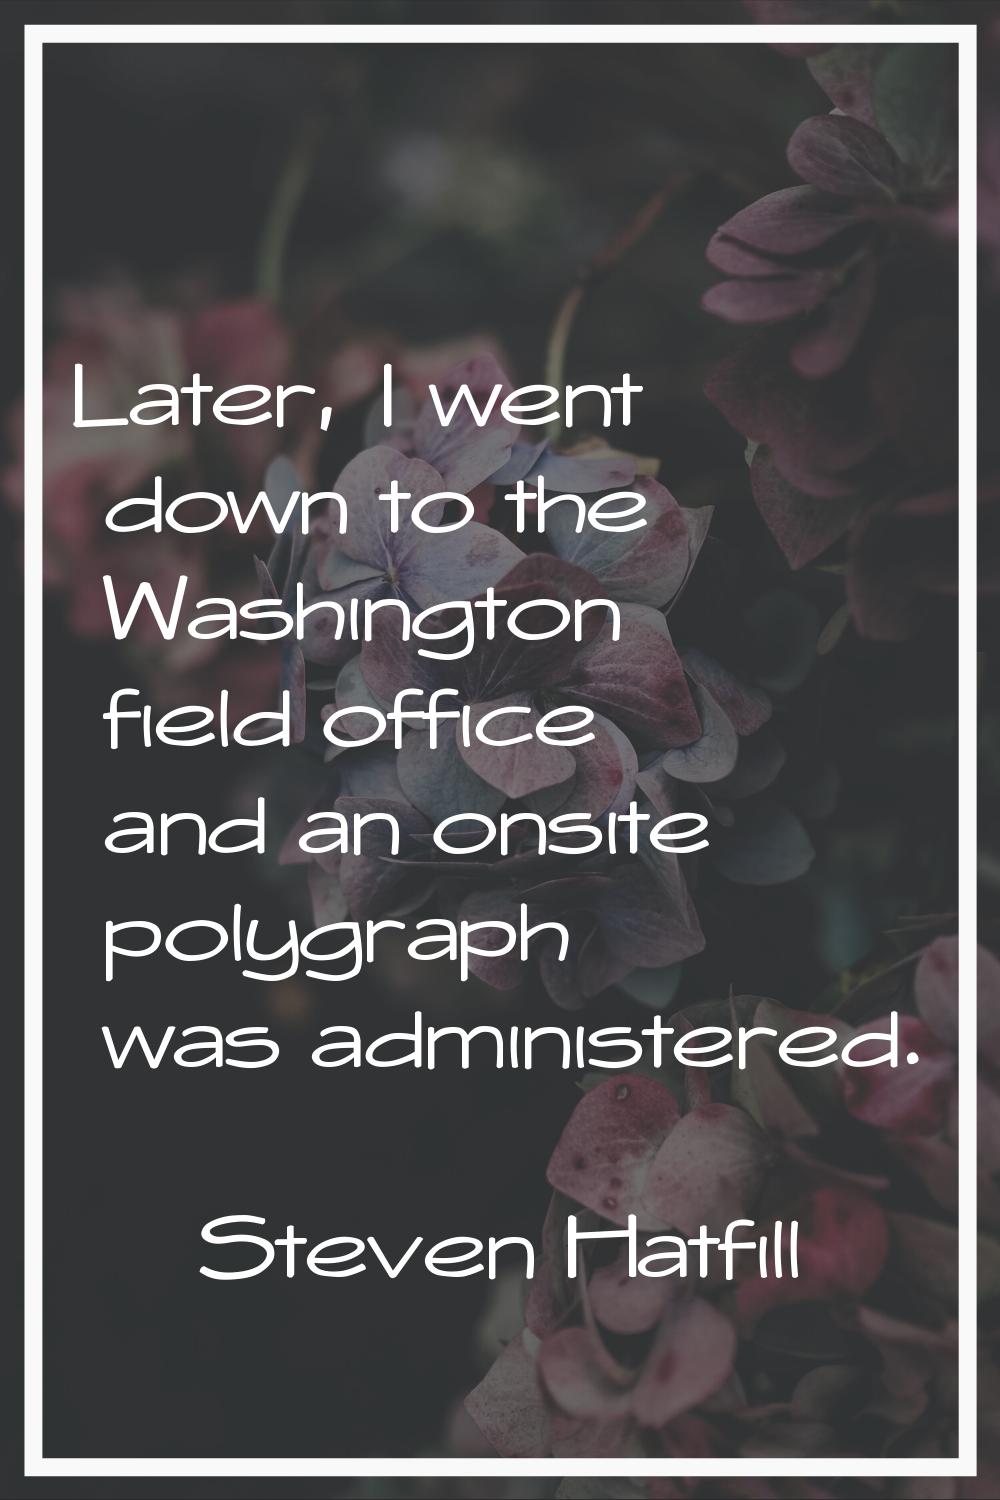 Later, I went down to the Washington field office and an onsite polygraph was administered.